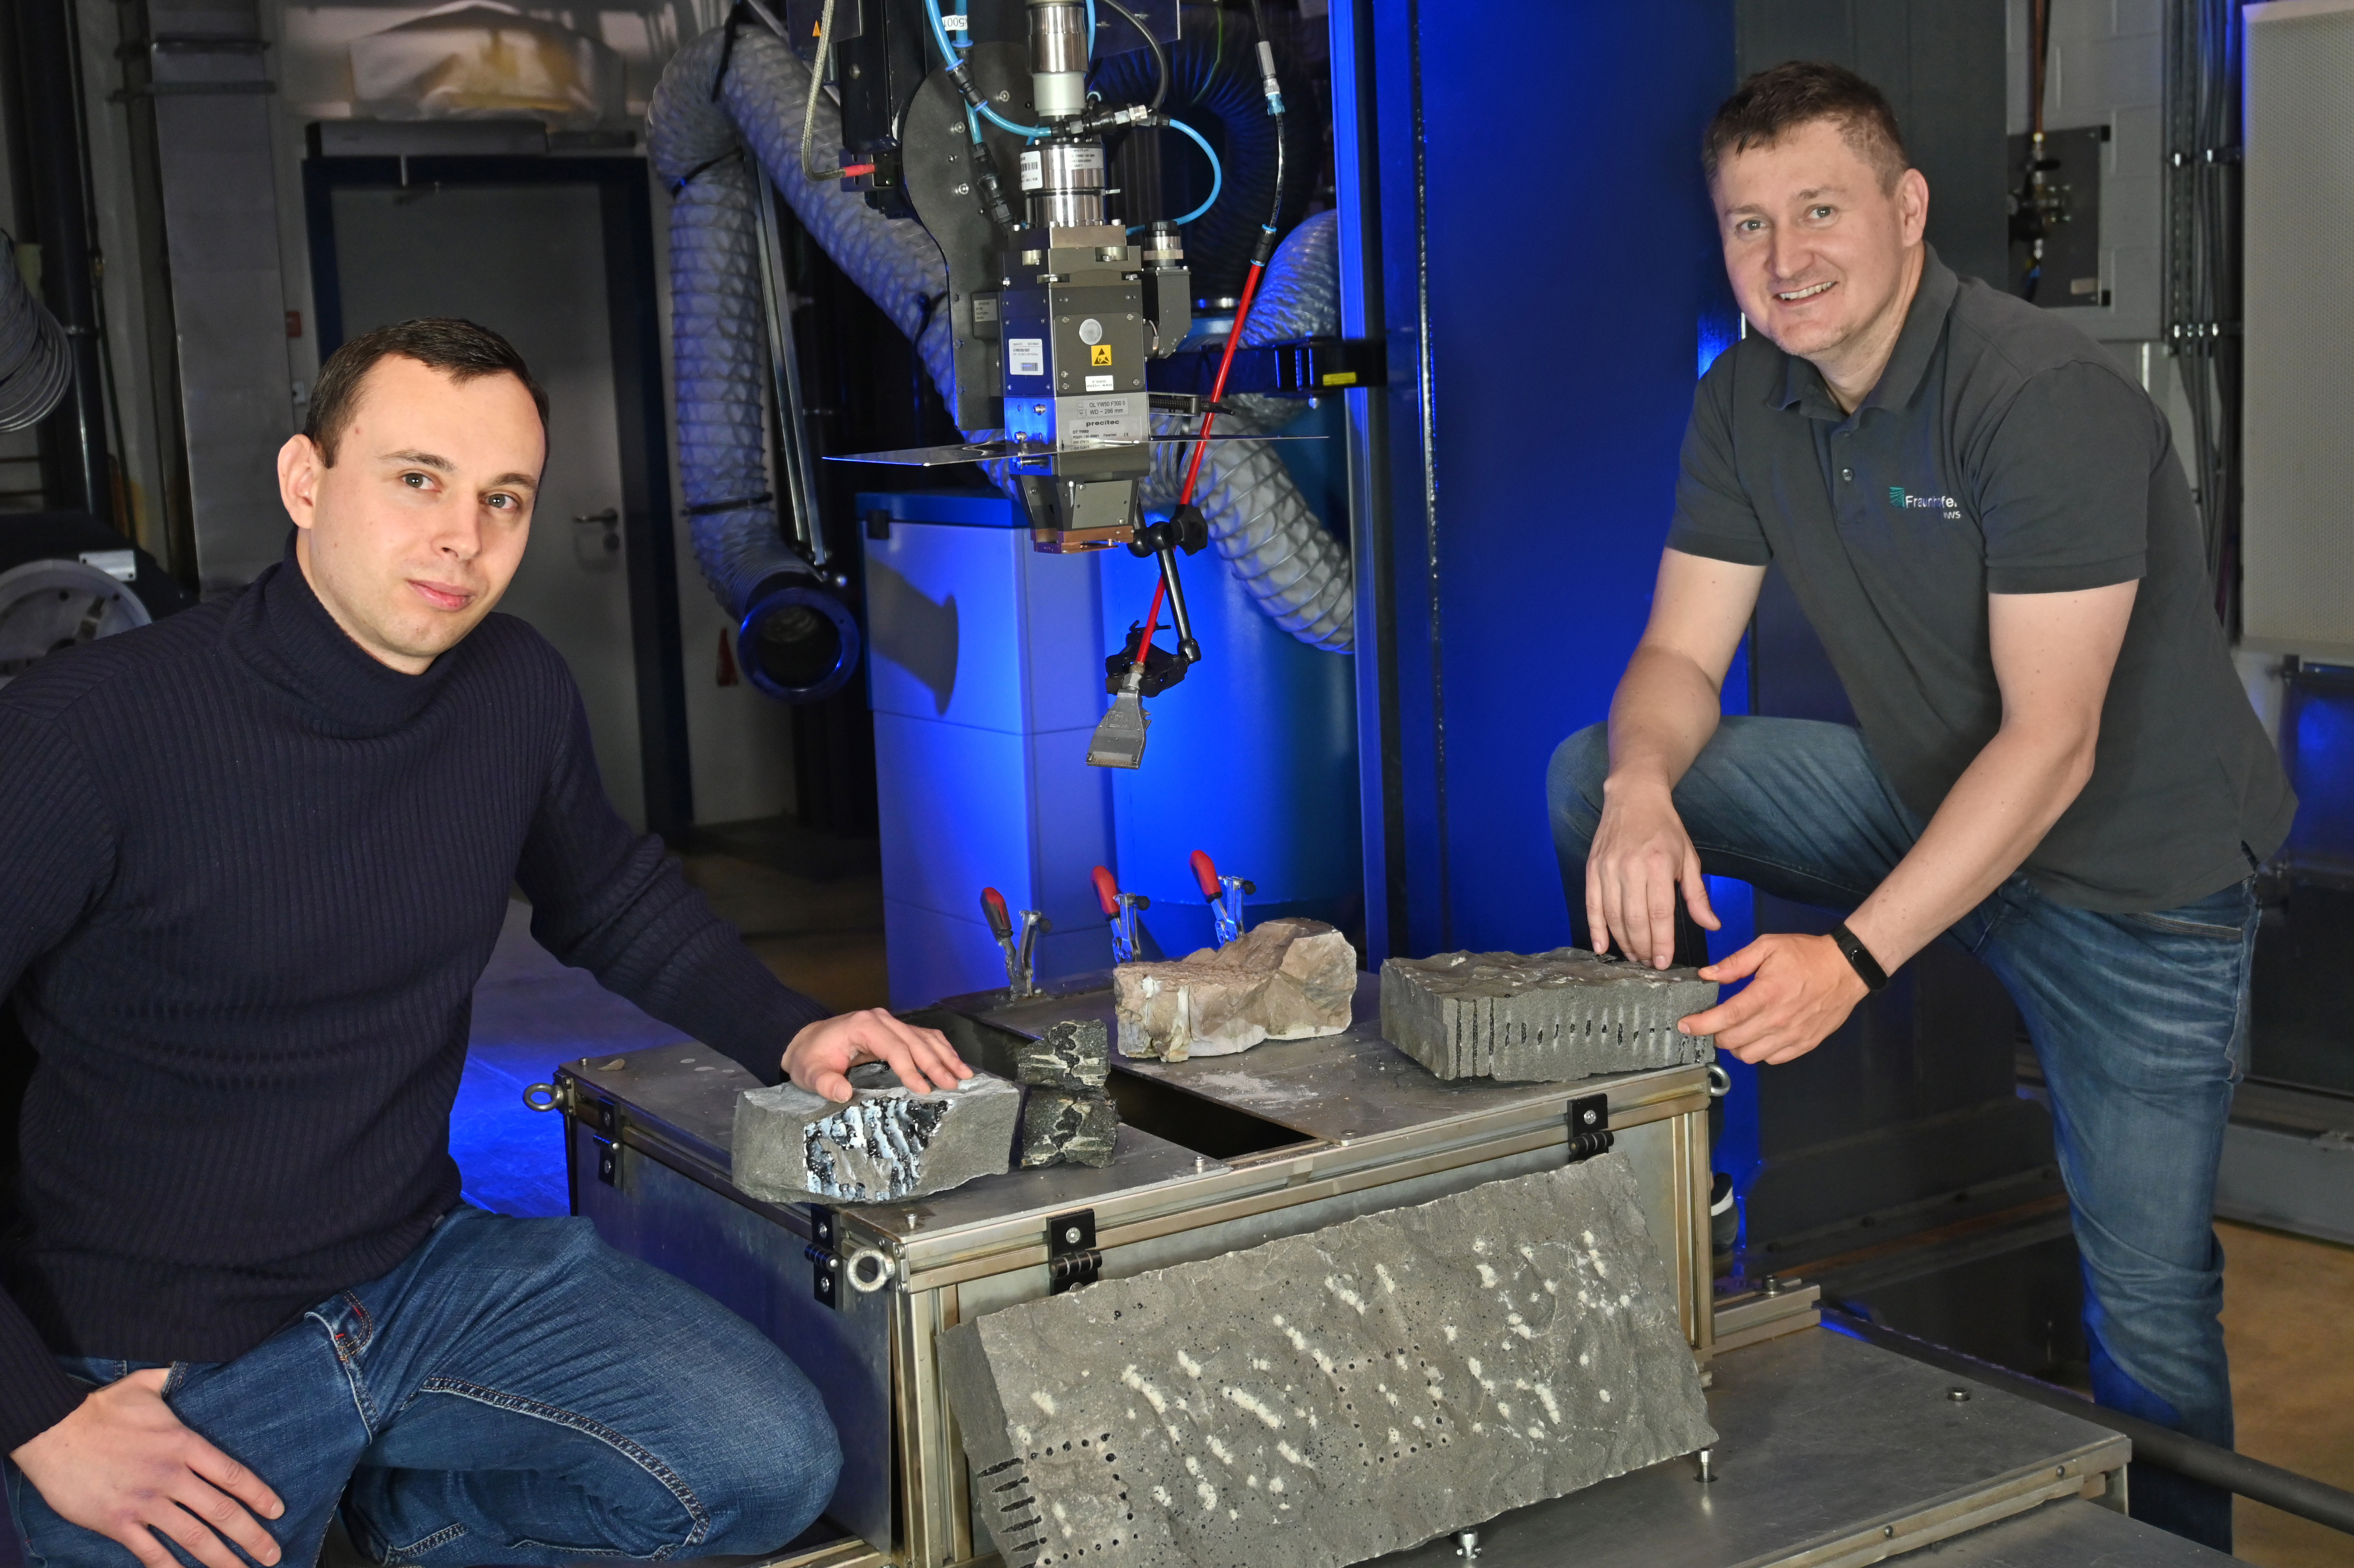 Ukrainian robotics specialist Oleksandr Proskurin (left) has been a visiting scientist in Patrick Herwig’s (right) research group at Fraunhofer IWS in Dresden since the beginning of 2023. Together, they are developing methods to decommission infrastructure destroyed and contaminated by nuclear radiation using laser technology, here in the processing of non-radioactive test material.